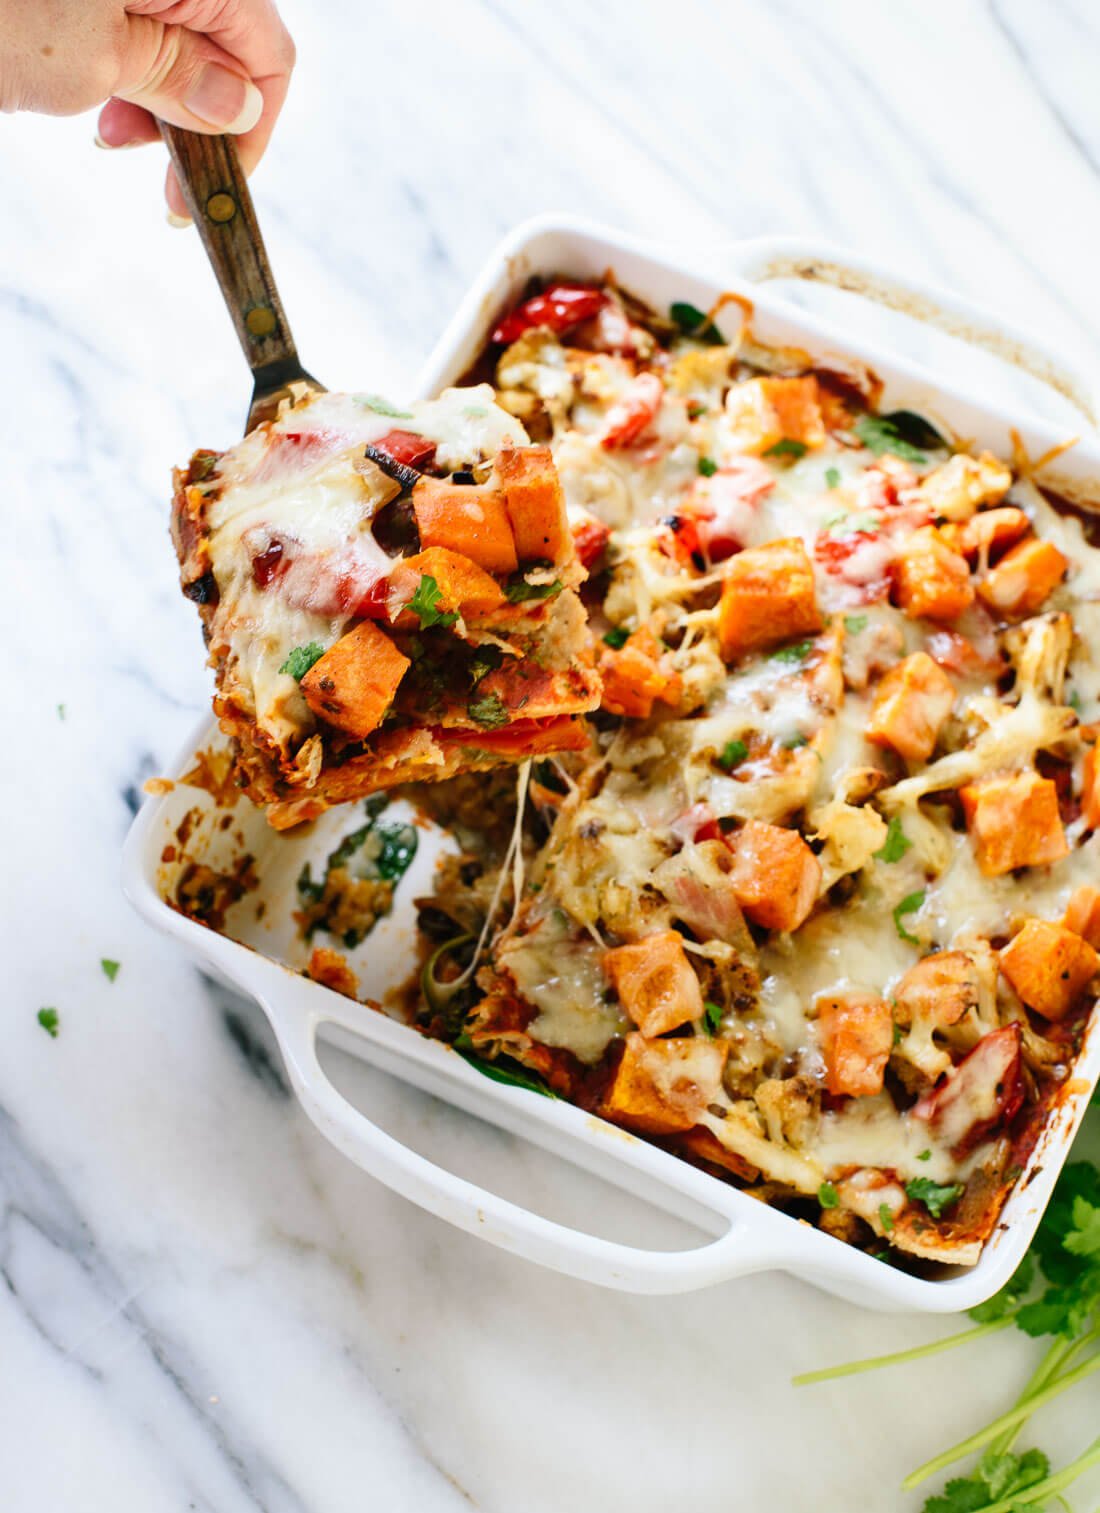 This enchilada casserole recipe is a hearty, veggie-packed dinner loaded with fresh Mexican flavors! cookieandkate.com